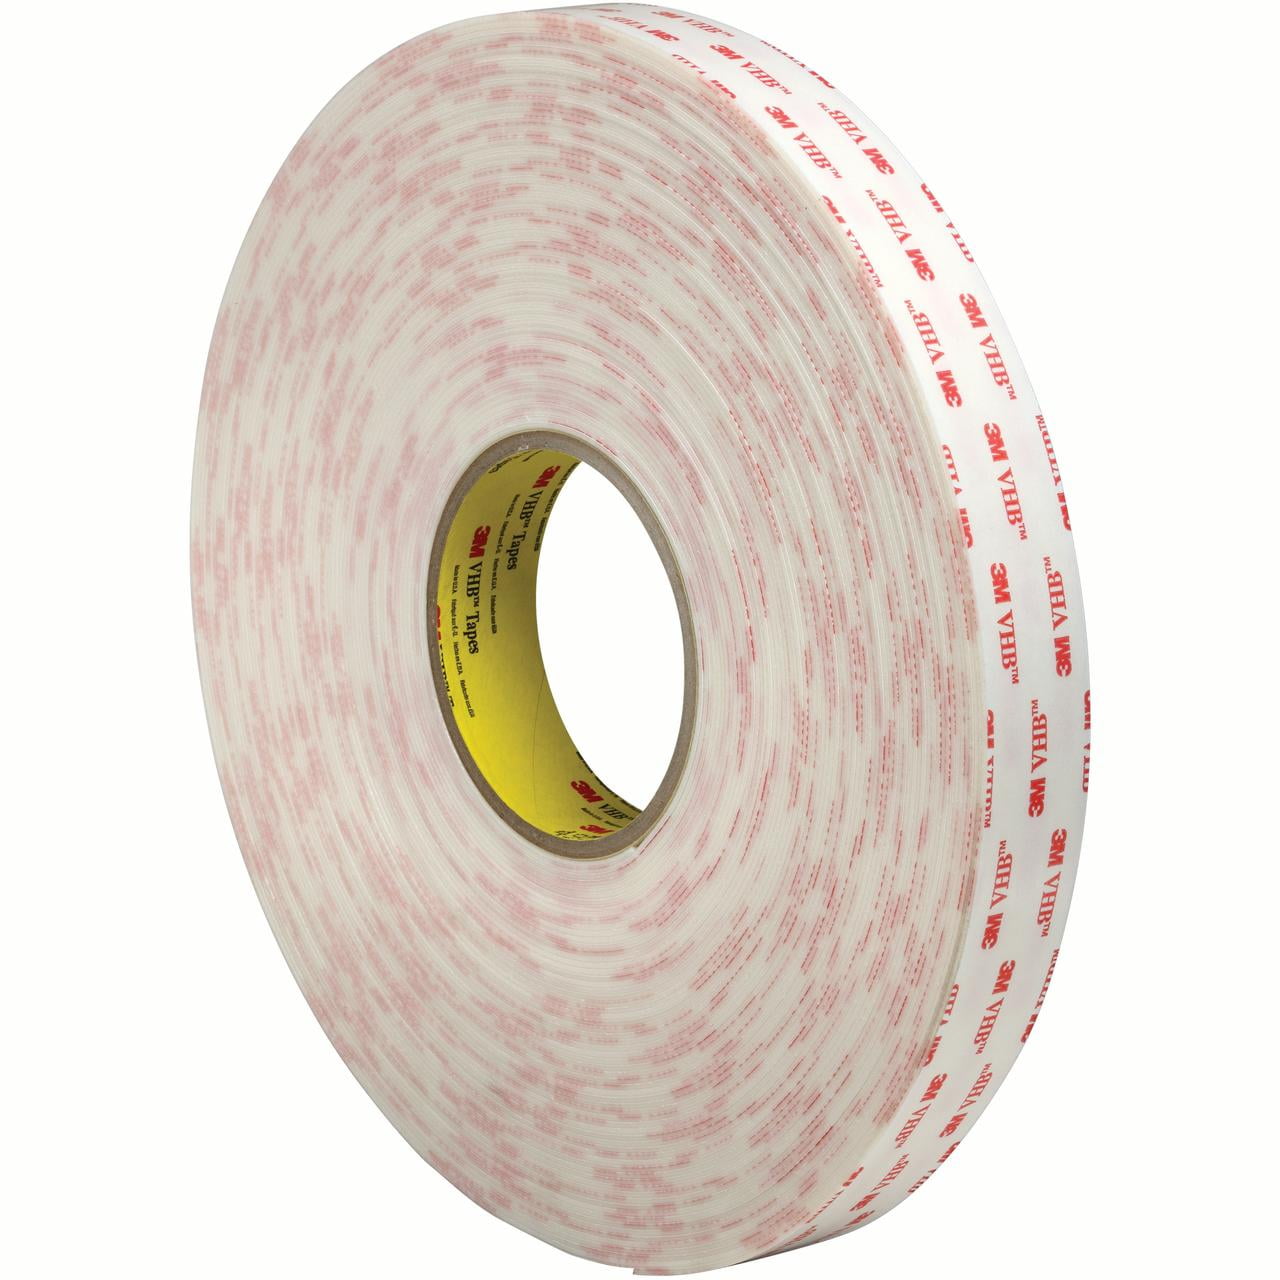 495501r 1 In. X 5 Yards White 3m 4955 Tape